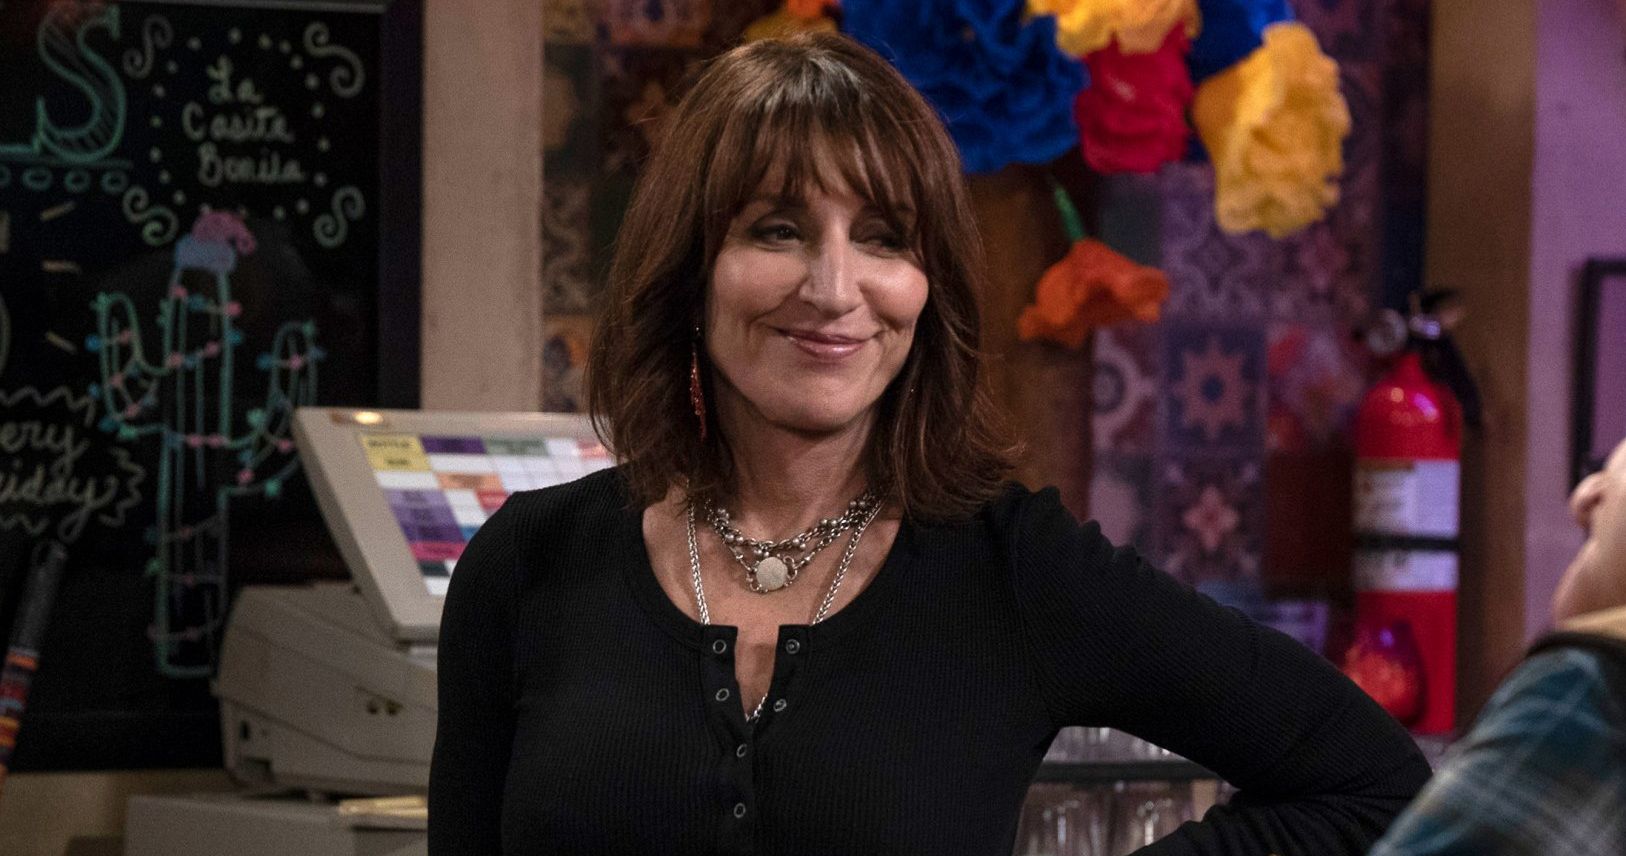 Katey Sagal Is Recovering After Being Hit by Car in L.A.